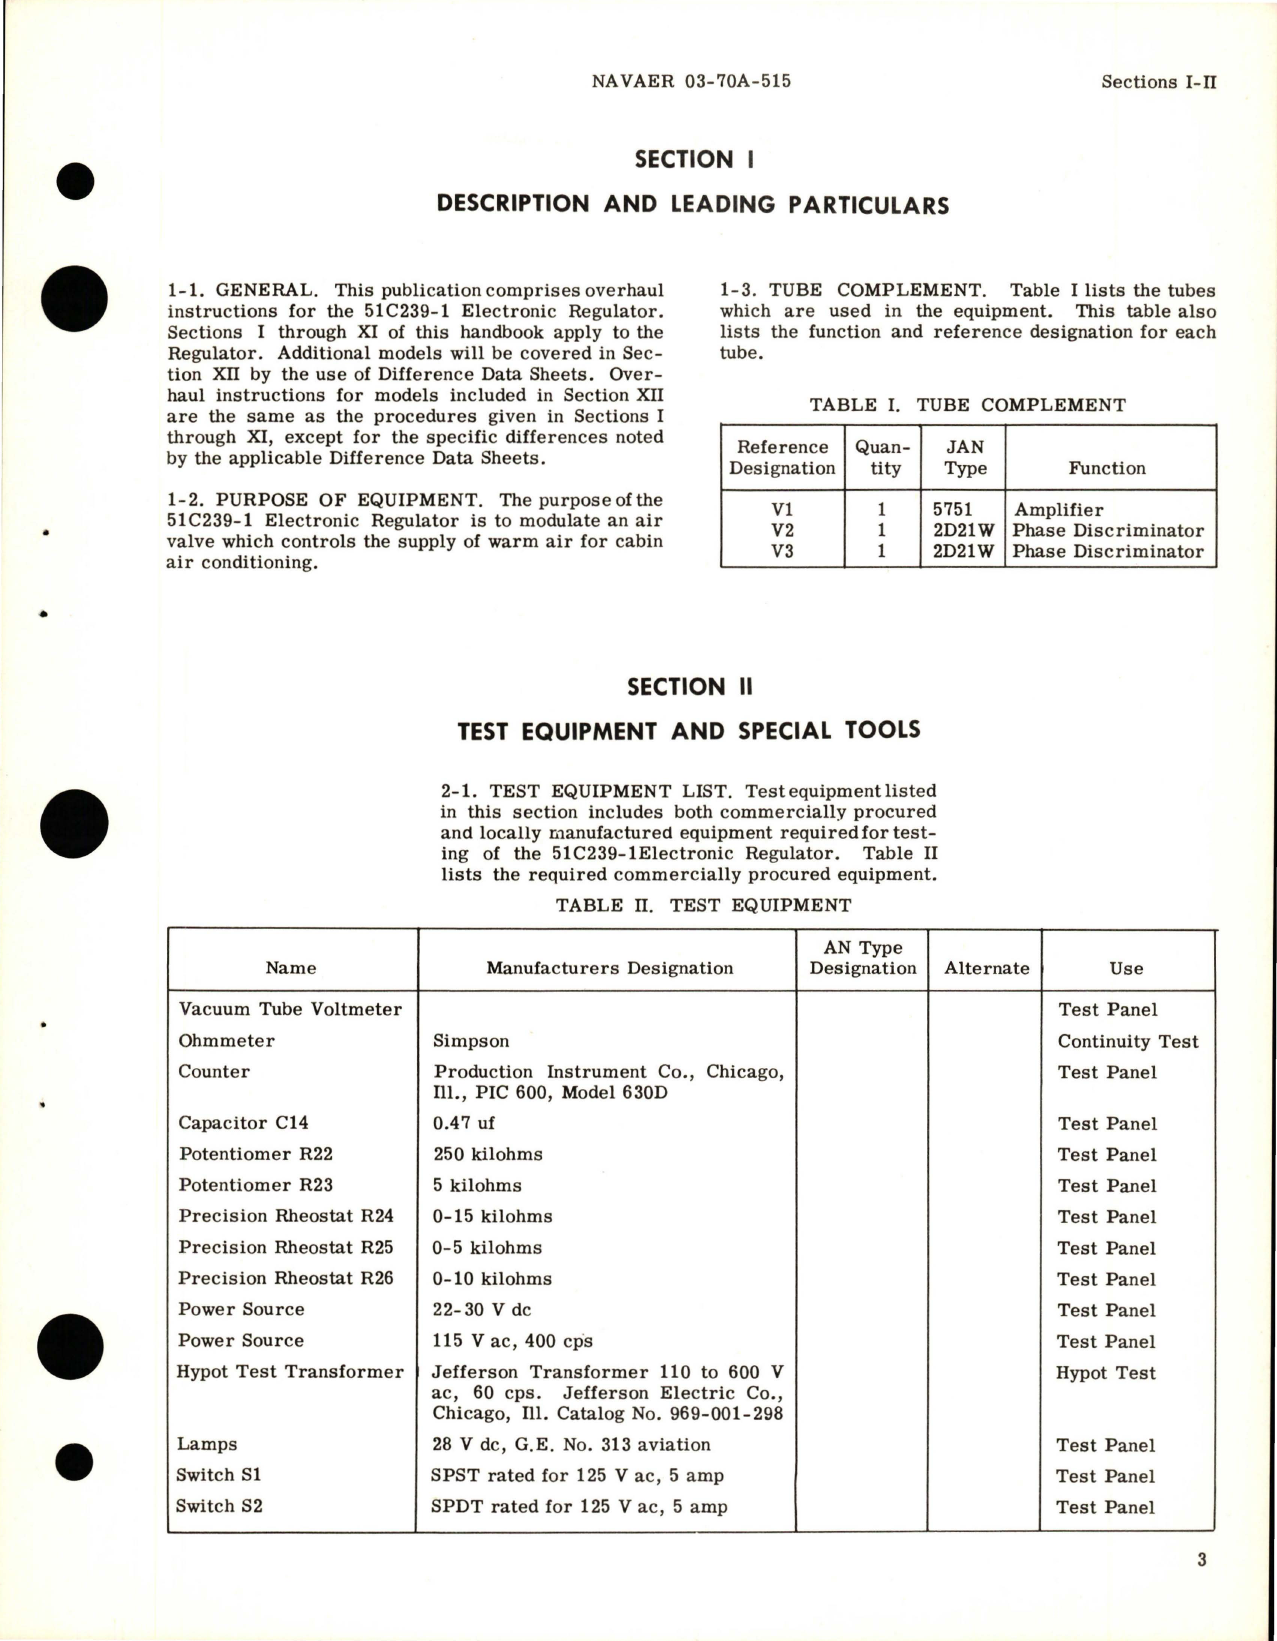 Sample page 7 from AirCorps Library document: Overhaul Instructions for Electronic Regulator - 51C239-1 and 51C242-1